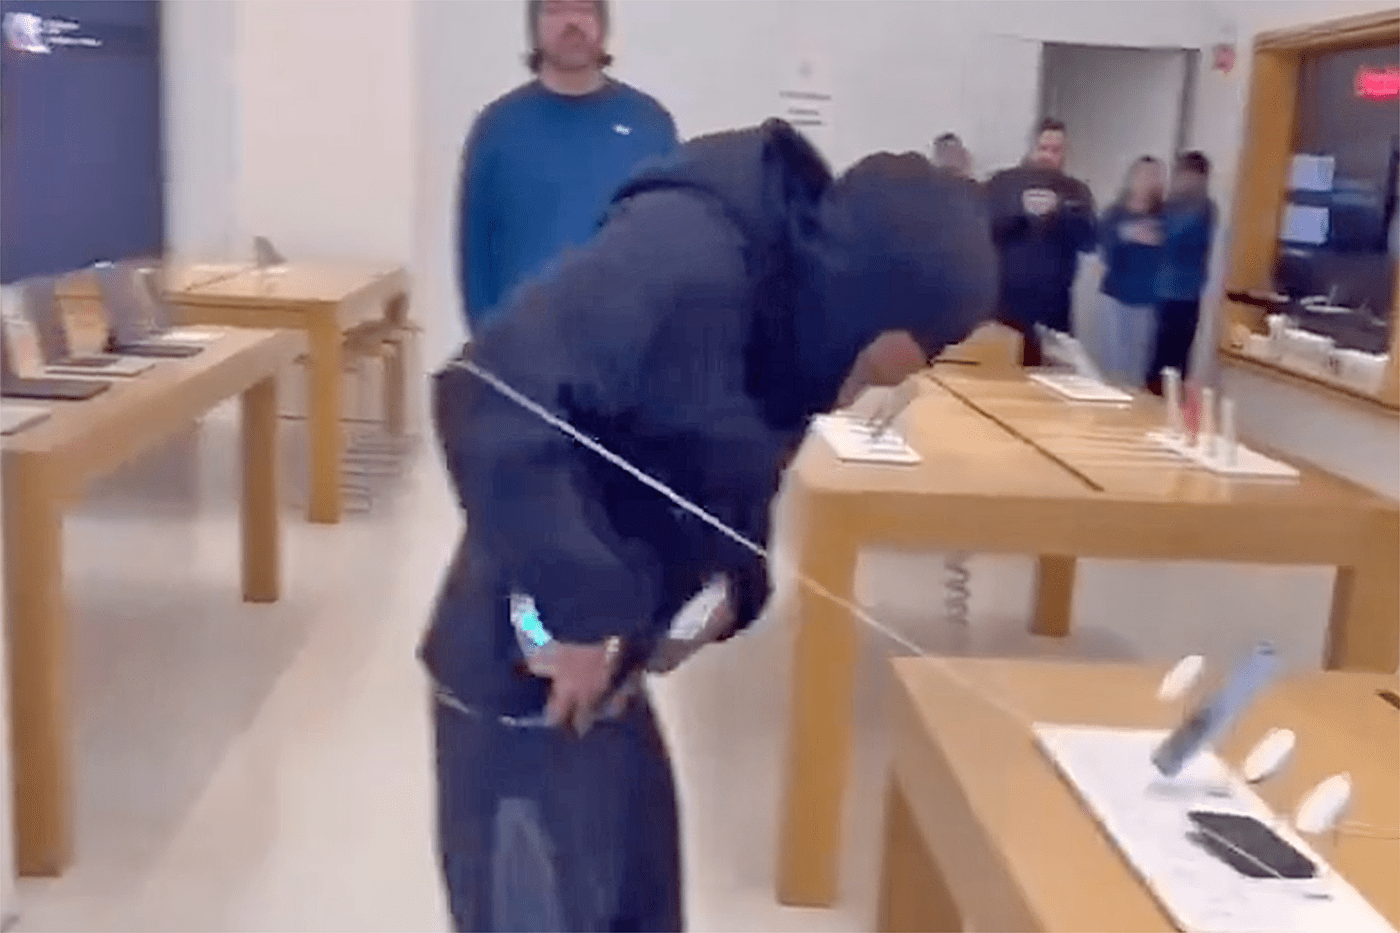 A man steals iPhones from an Apple store.